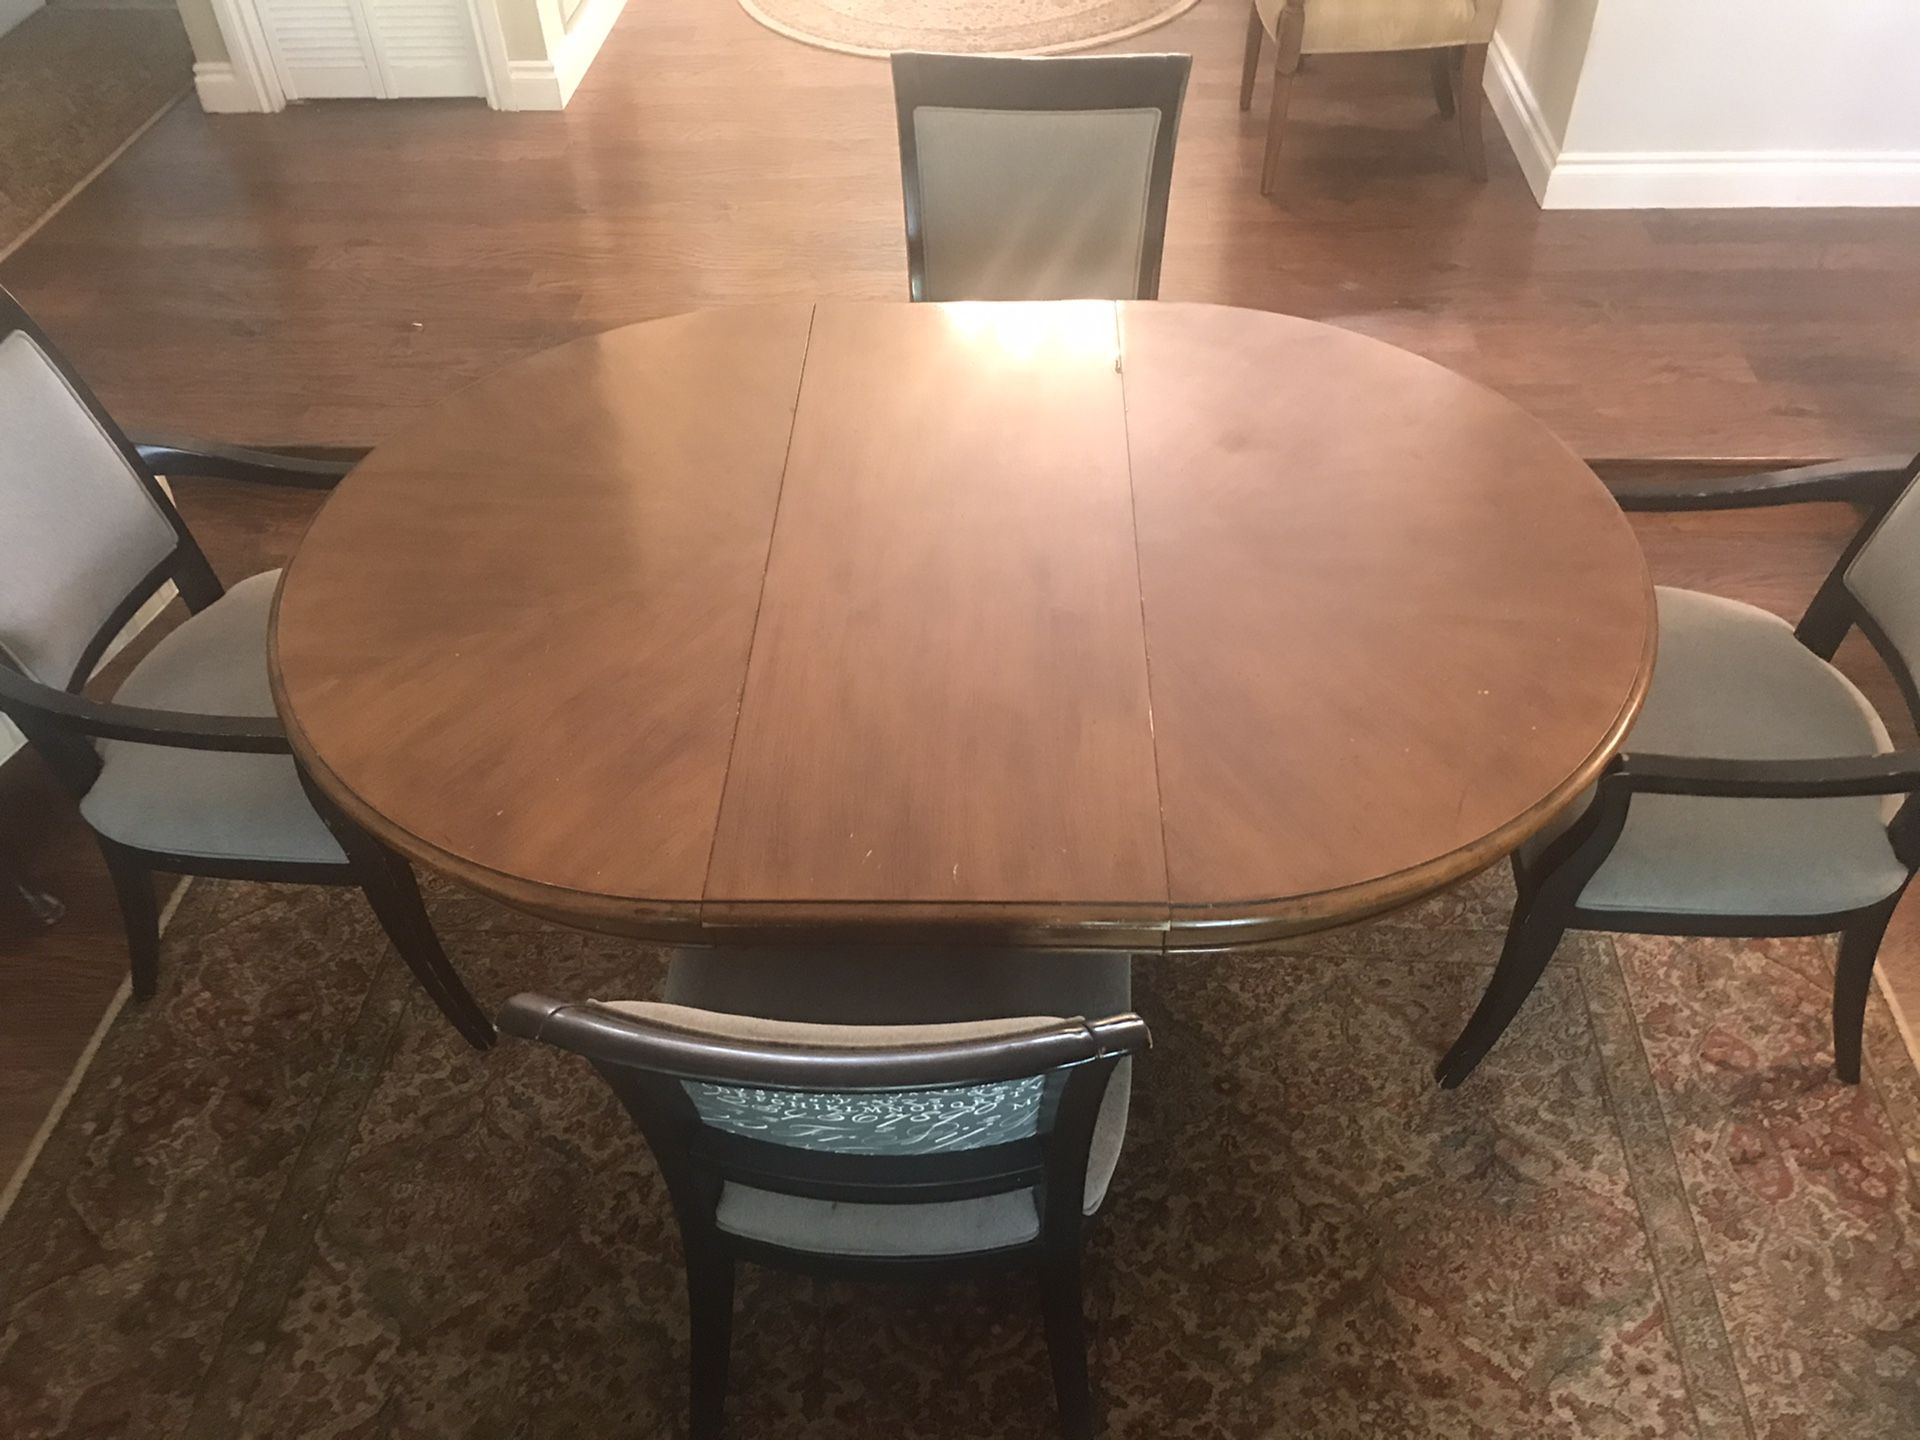 Drexel Heritage Table with leaf and 4 Chairs (kitchen or dining)